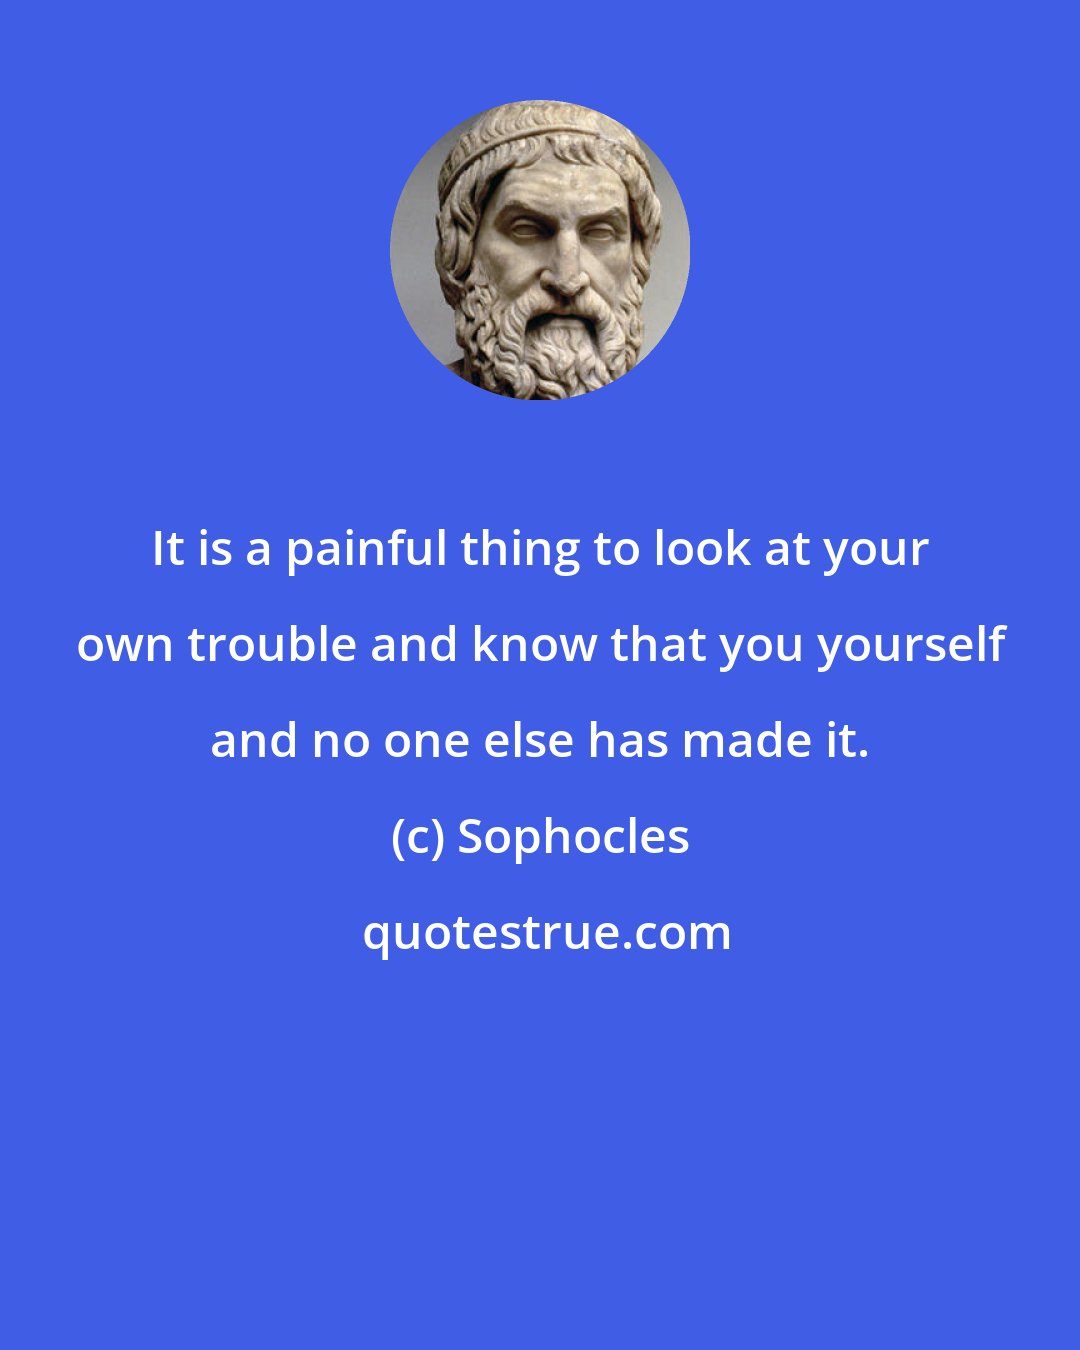 Sophocles: It is a painful thing to look at your own trouble and know that you yourself and no one else has made it.